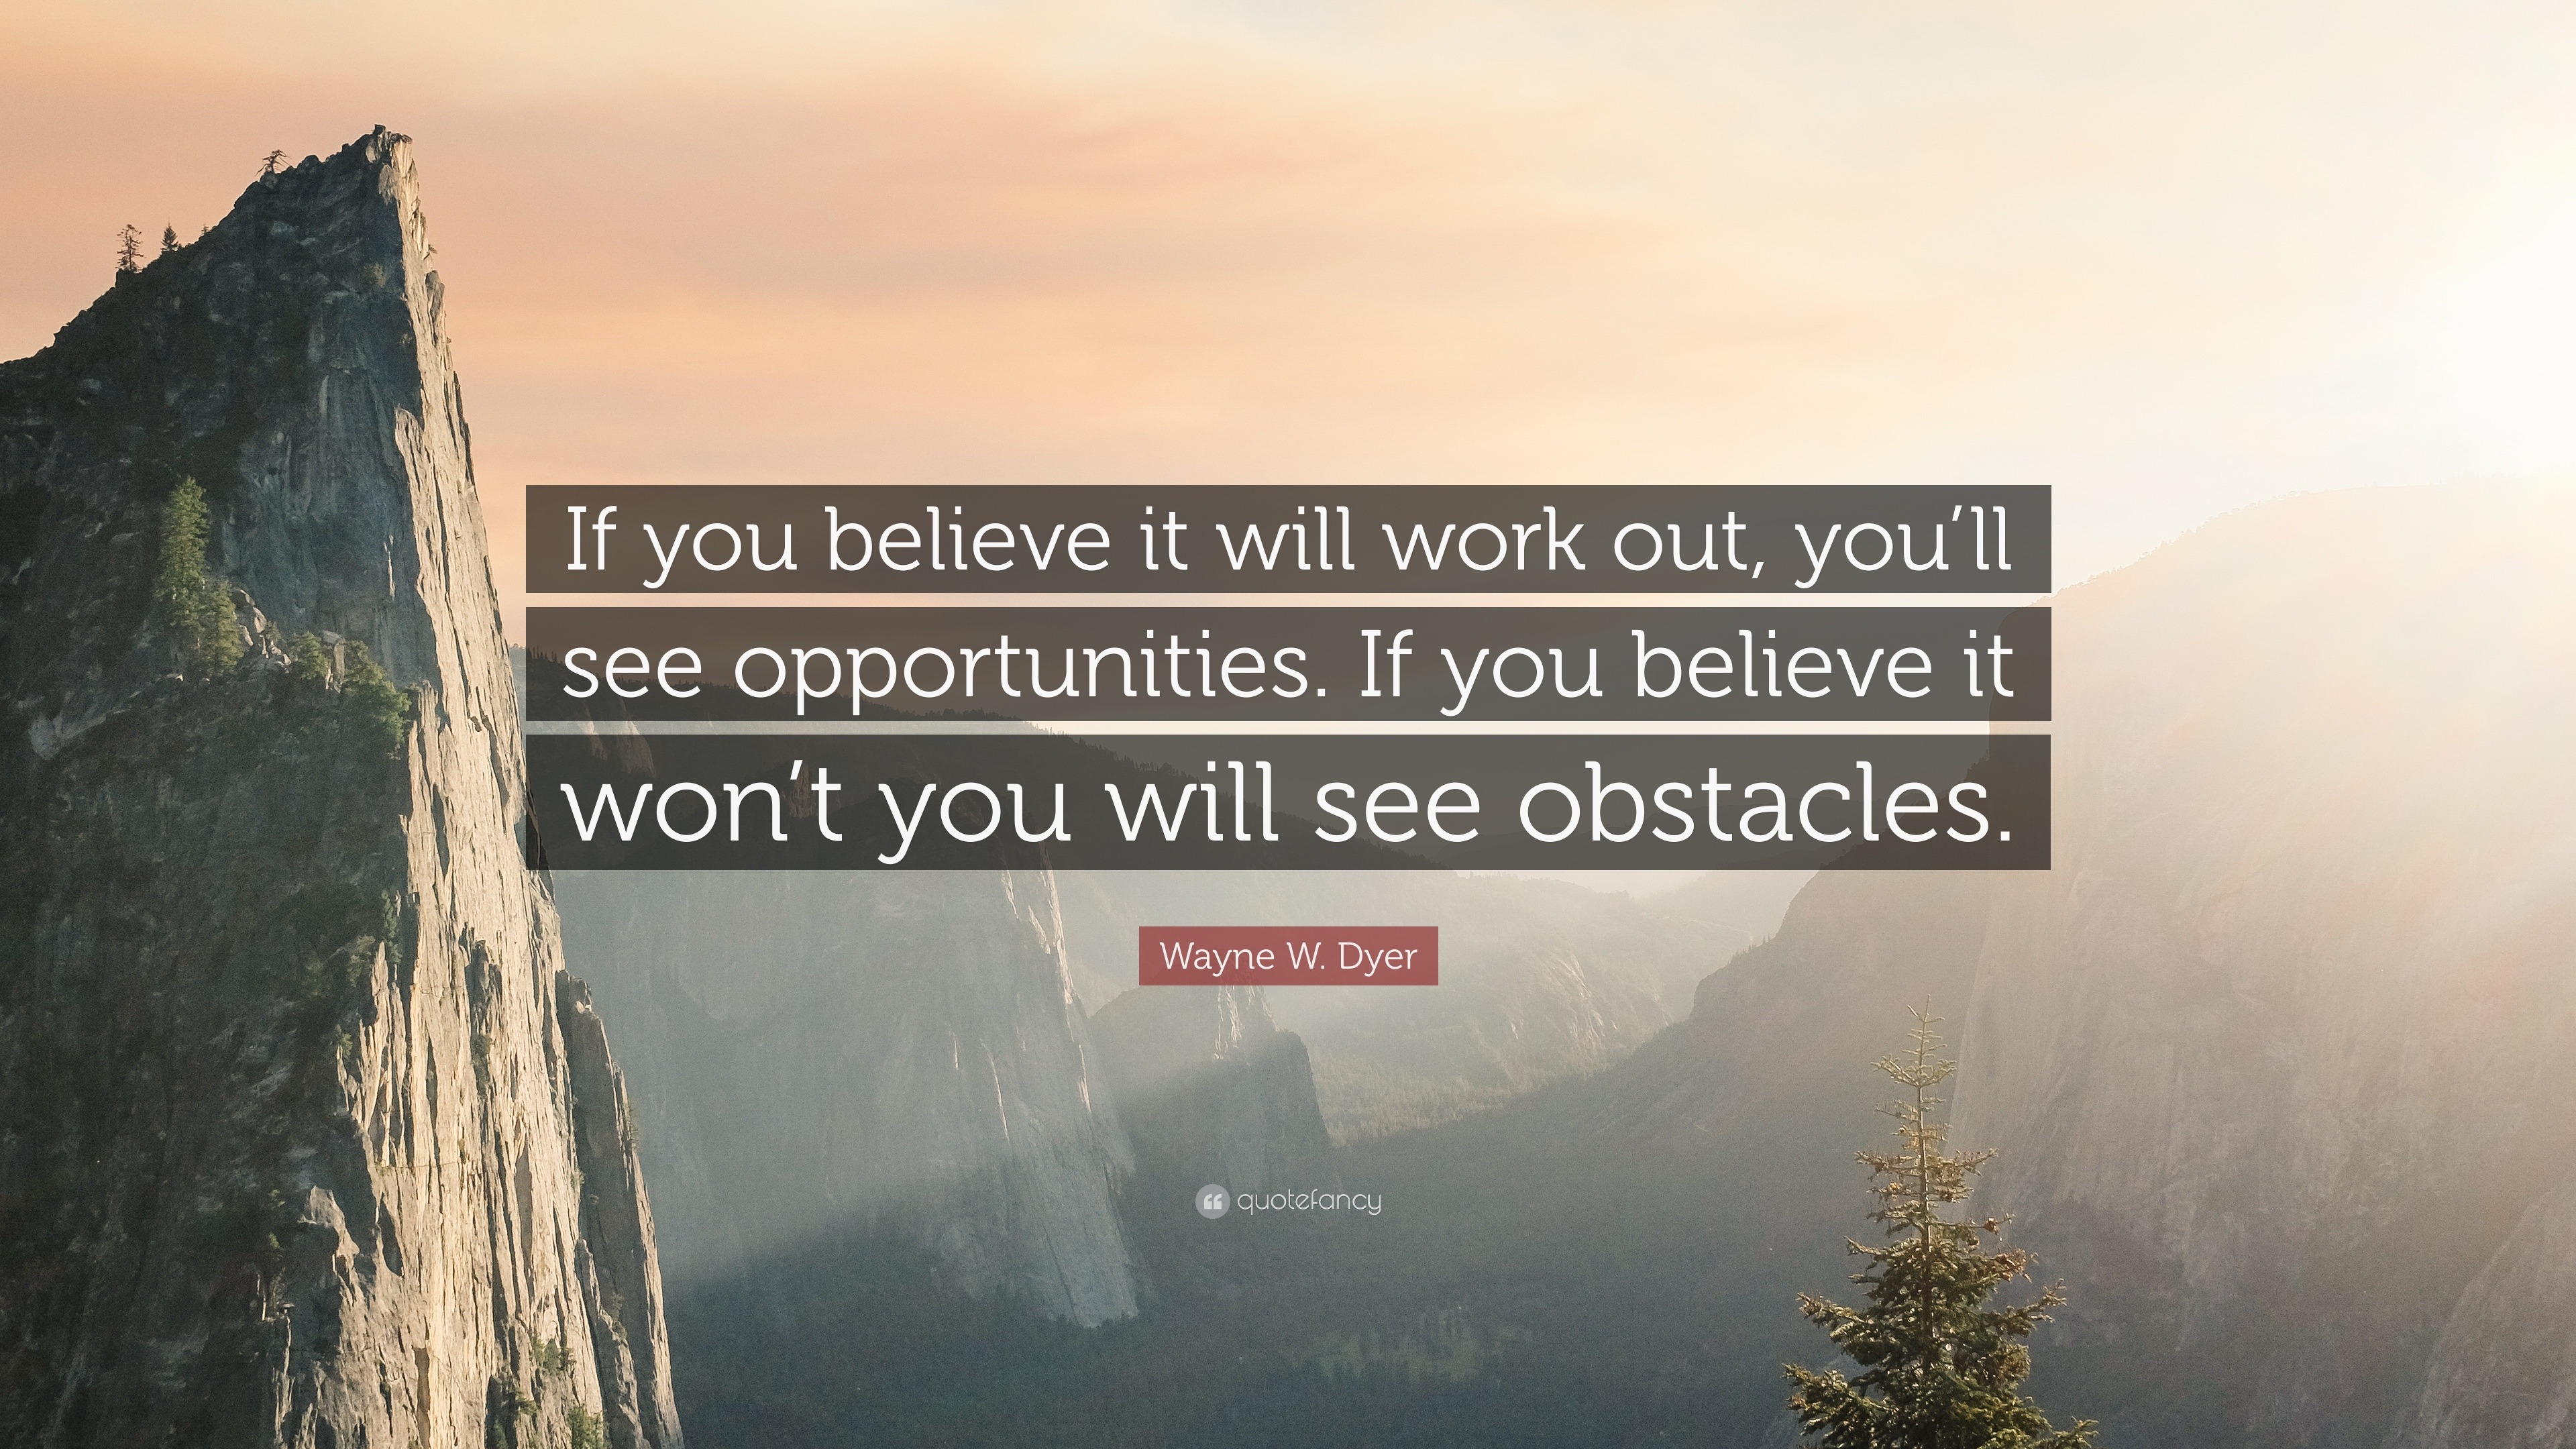 436163 Wayne W Dyer Quote If you believe it will work out you ll see